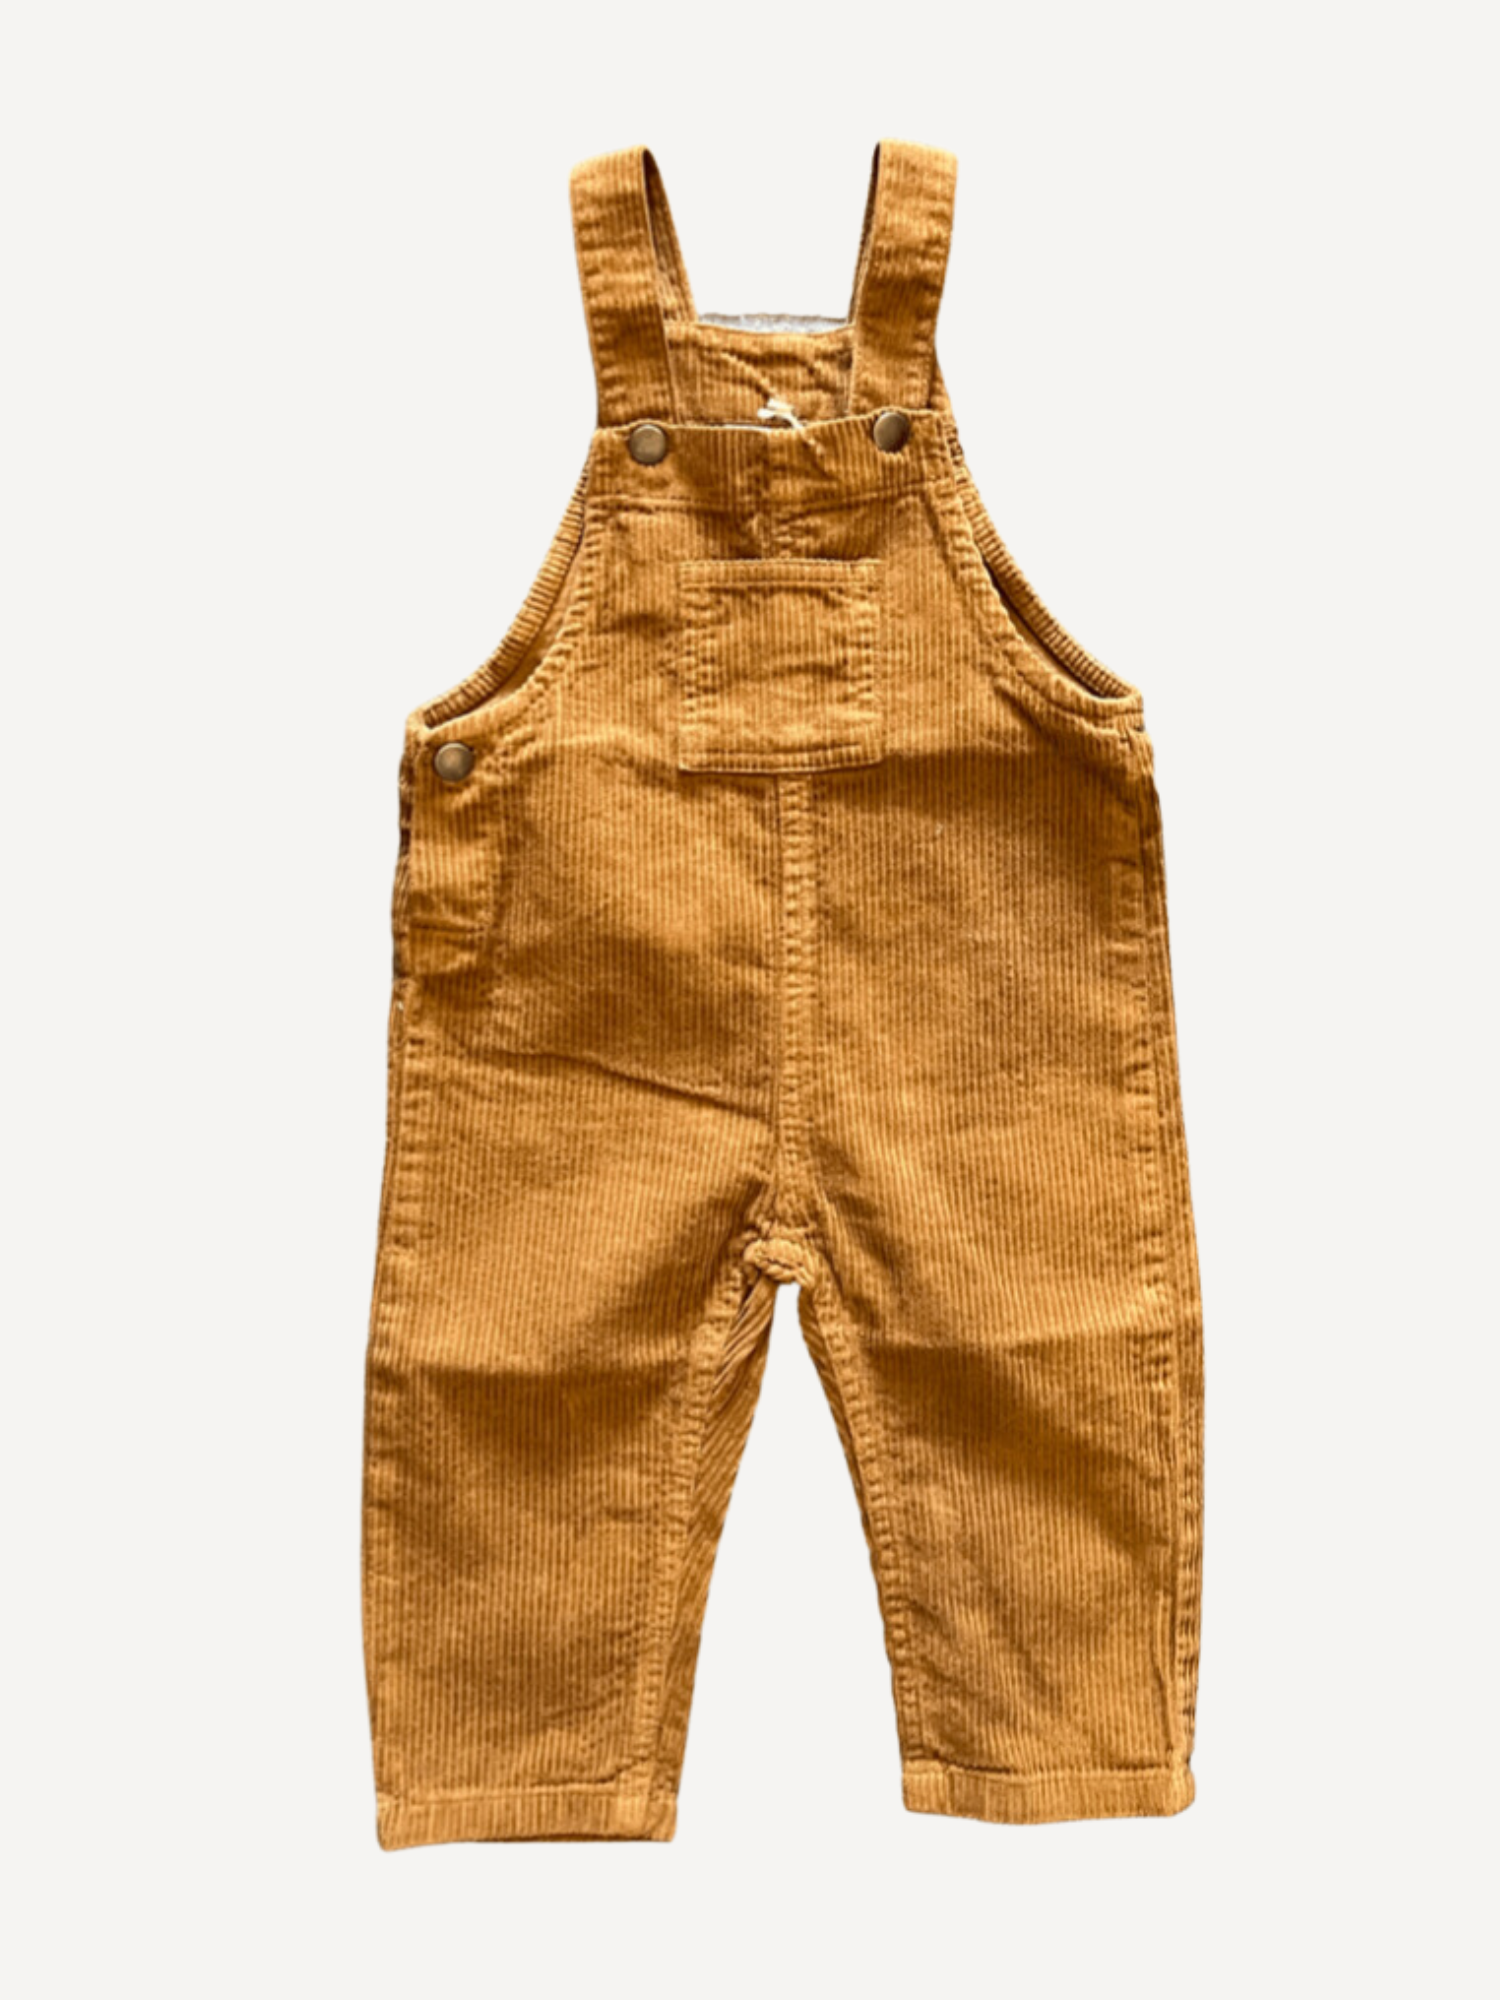 The Wild and Free Dungaree